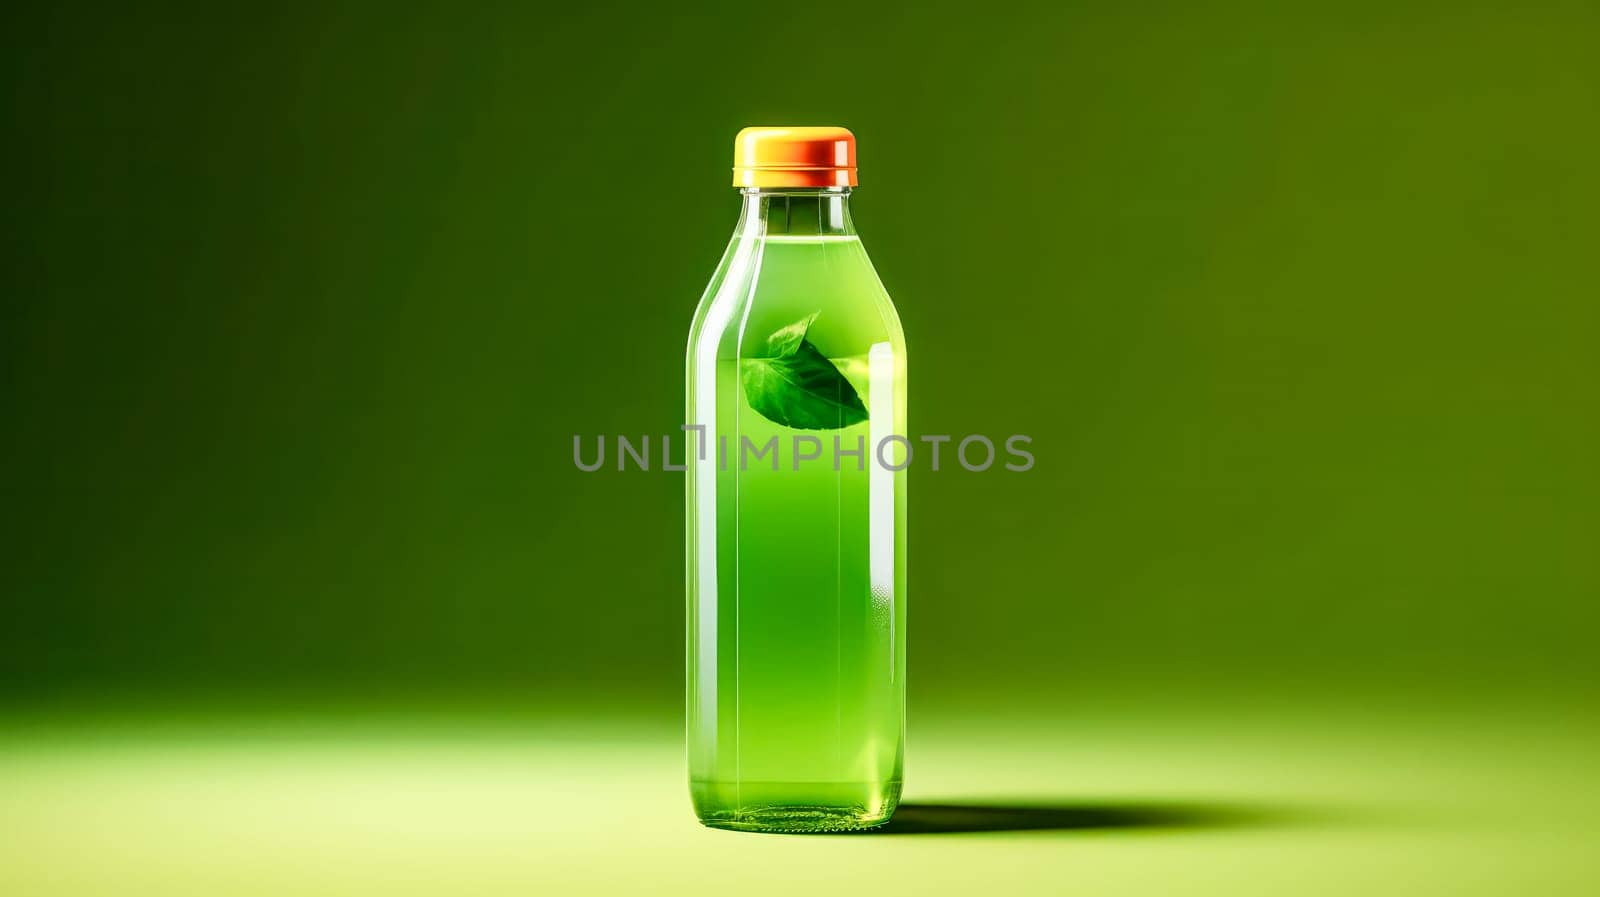 Vibrant wellness, Tonic green smoothie from vegetables in a bottle on a lush green backdrop. A refreshing stock photo embodying the concept of healthy drinks